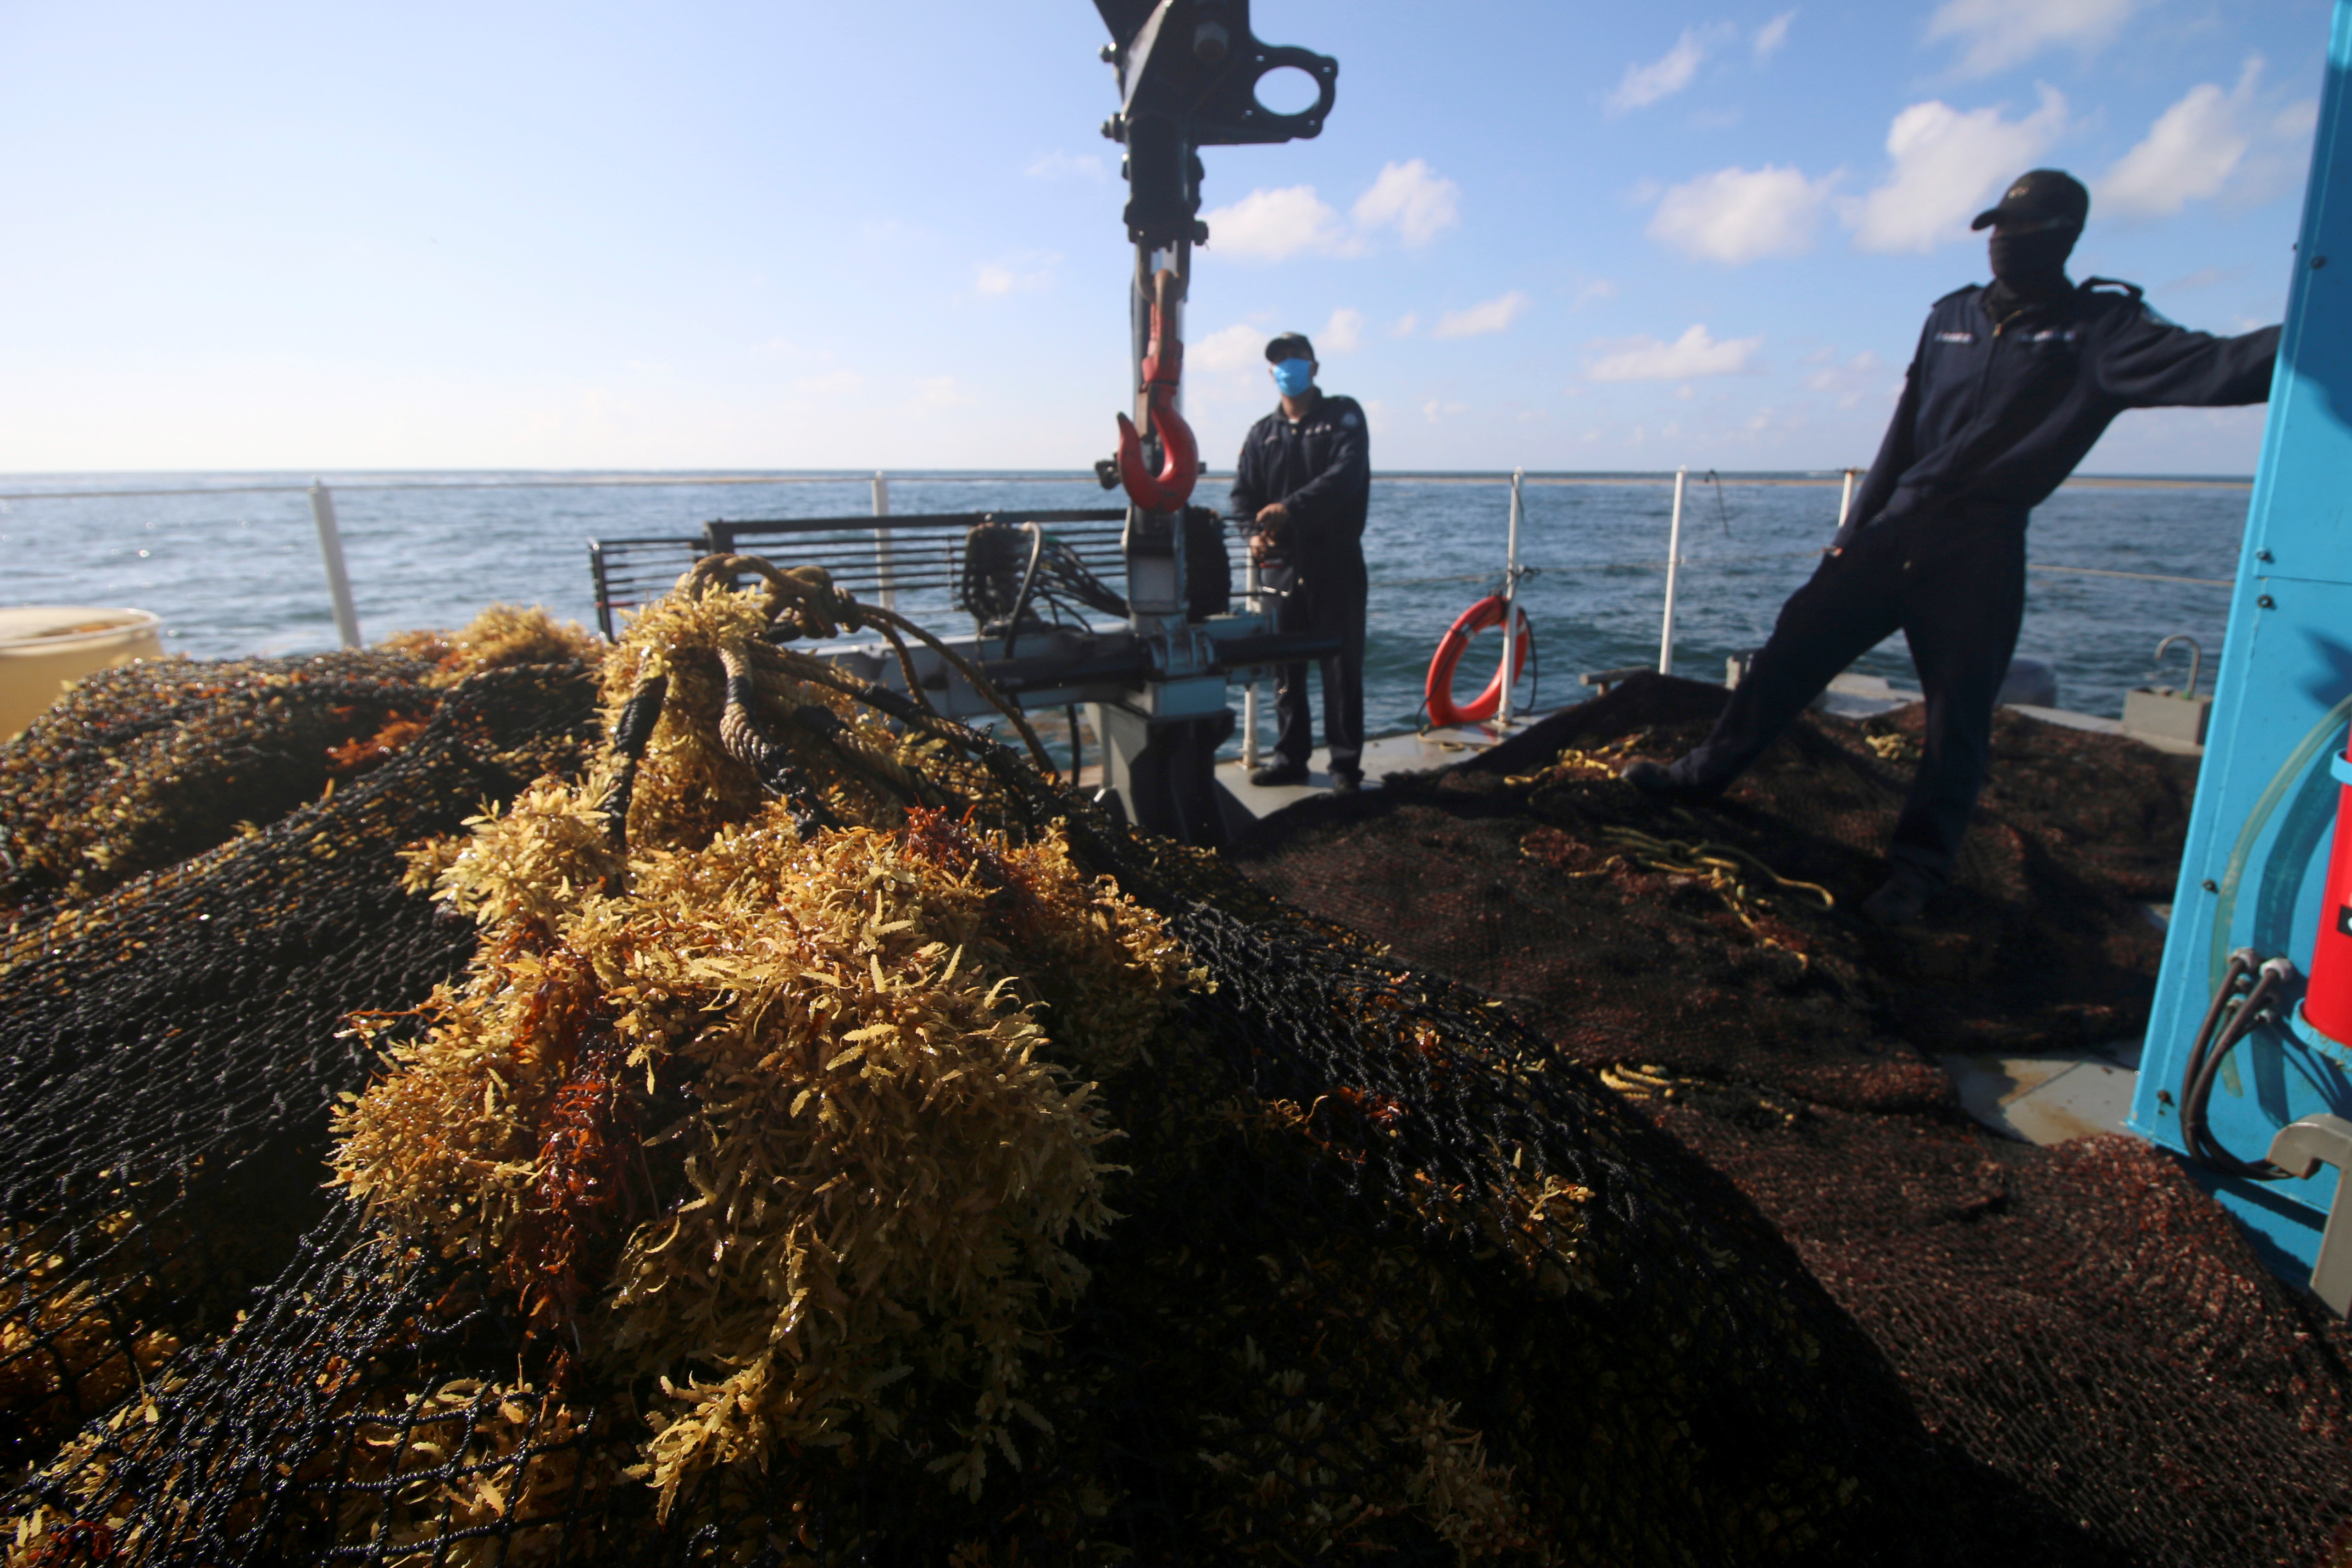 Mexican Marines stand next to sargassum removed from the sea as part of a government program to remove the algae, in Cancun, Mexico July 20, 2021. Picture taken July 20, 2021. REUTERS/Paola Chiomante